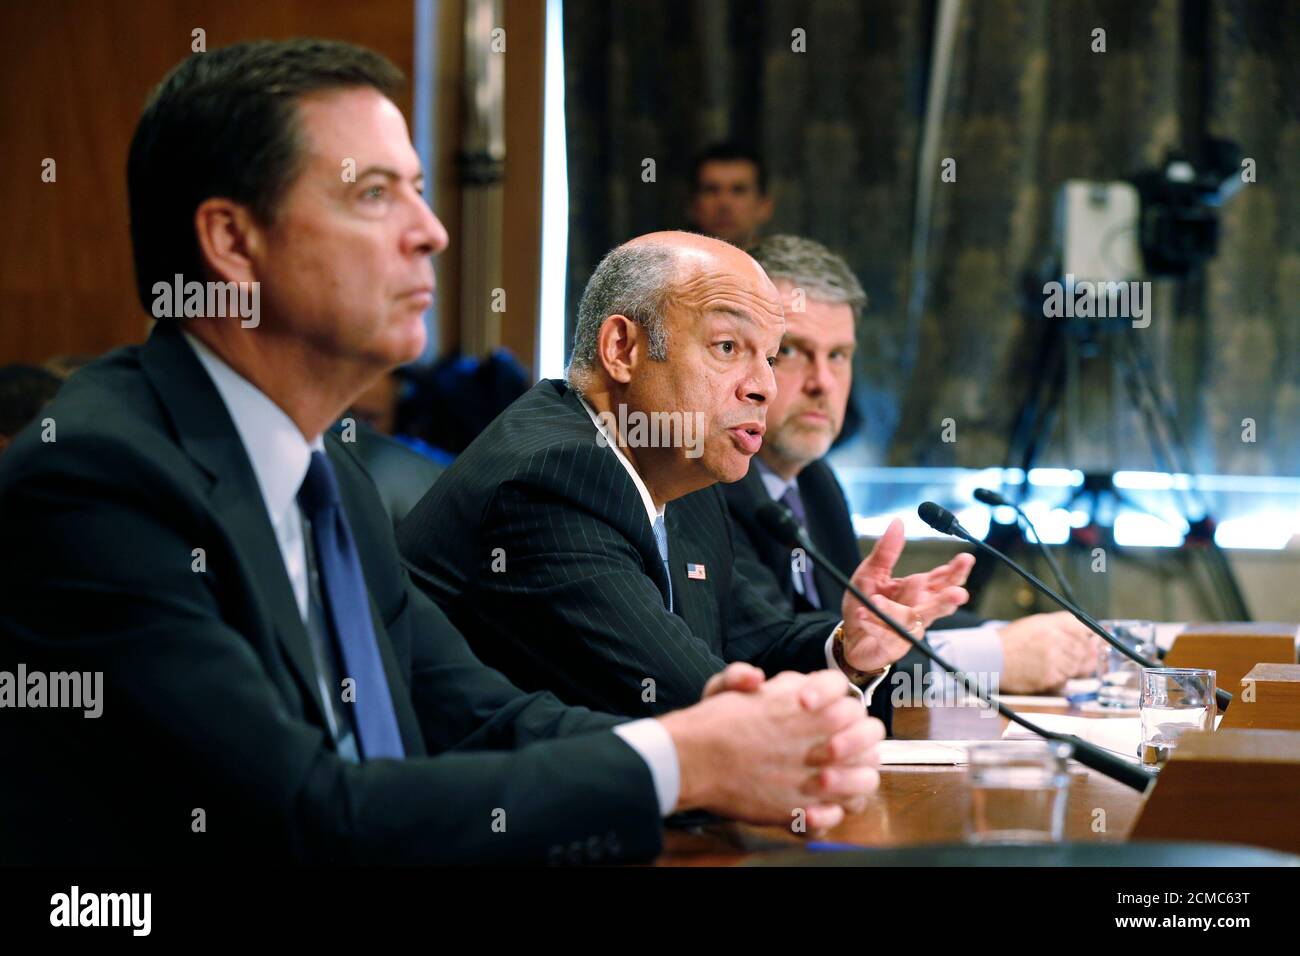 Homeland Security Secretary Jeh Johnson (C) testifies on 'Threats to the Homeland' as FBI Director James Comey Jr. (L) and Director of the National Counterterrorism Center Nicholas Rasmussen listen during a Senate Homeland Security and Governmental Affairs Committee hearing on Capitol Hill in Washington, October 8, 2015. REUTERS/Jim Bourg Stock Photo